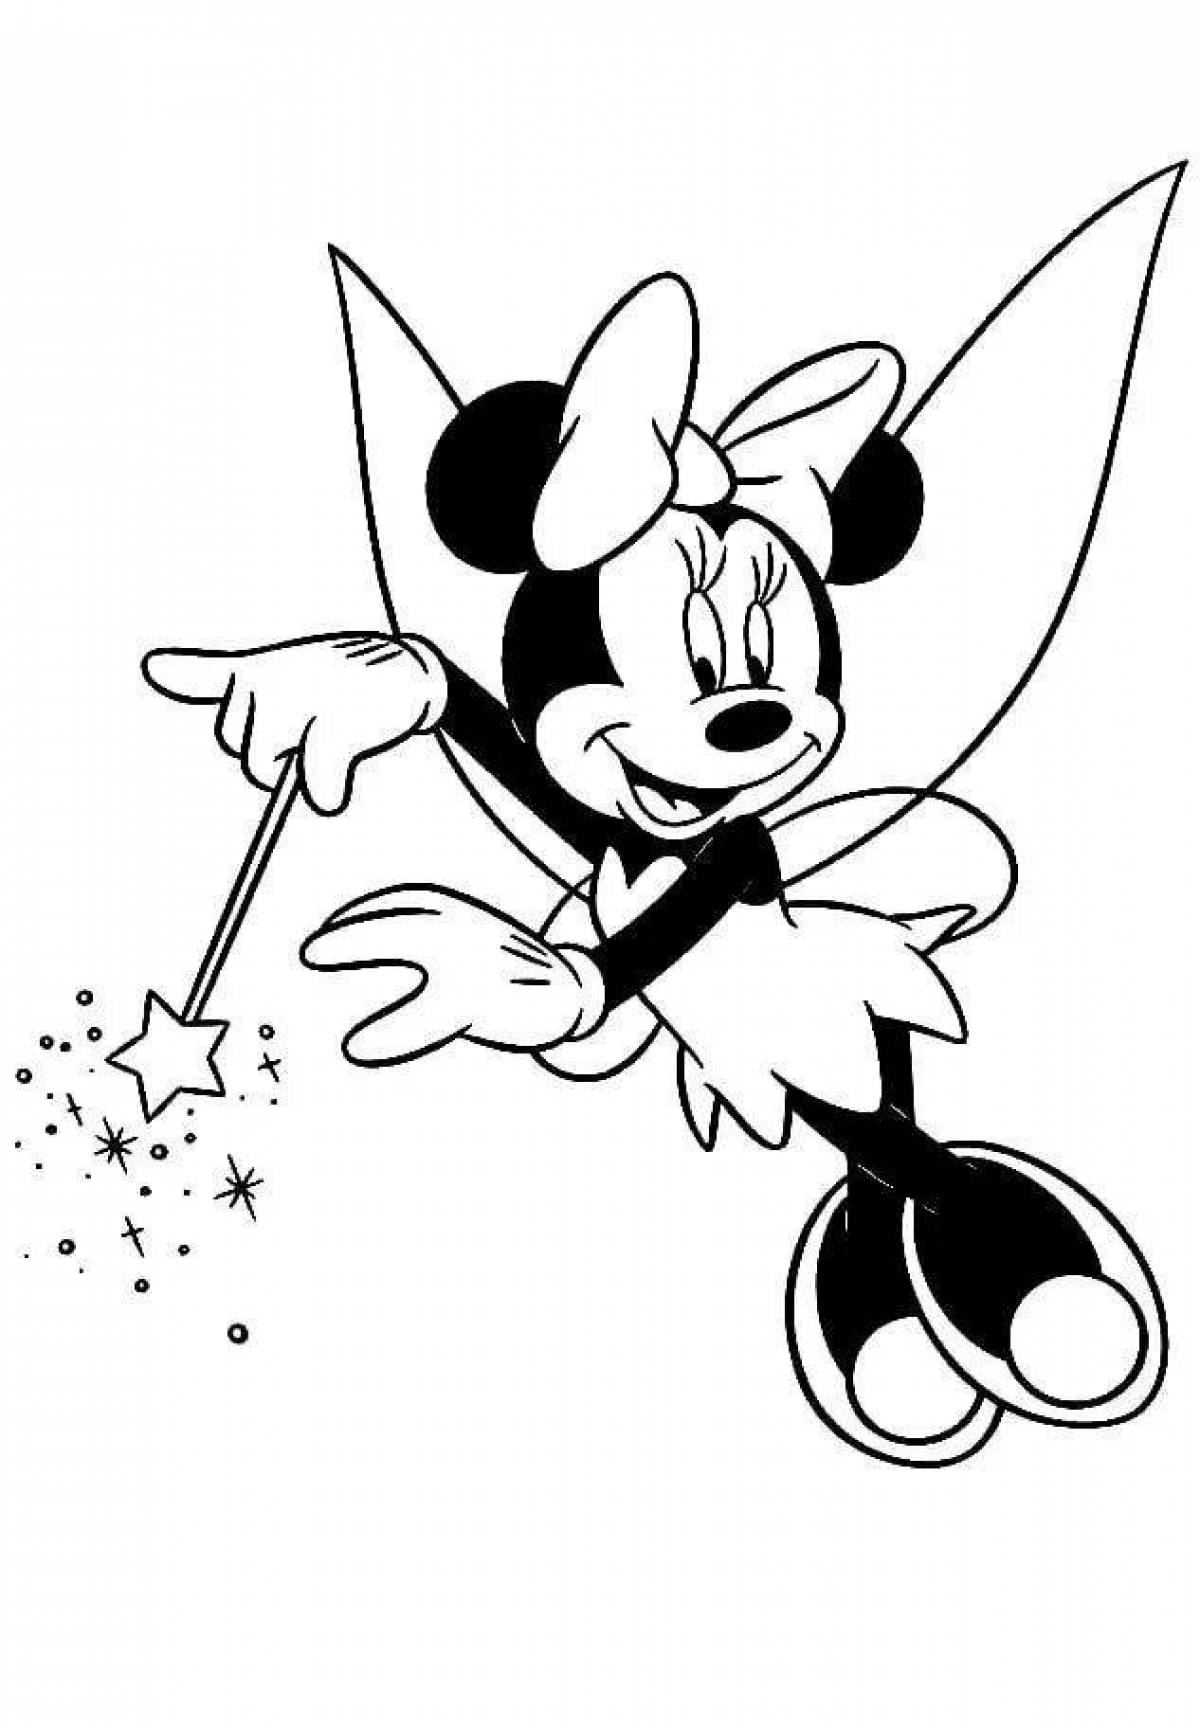 Coloring page charming minnie mouse